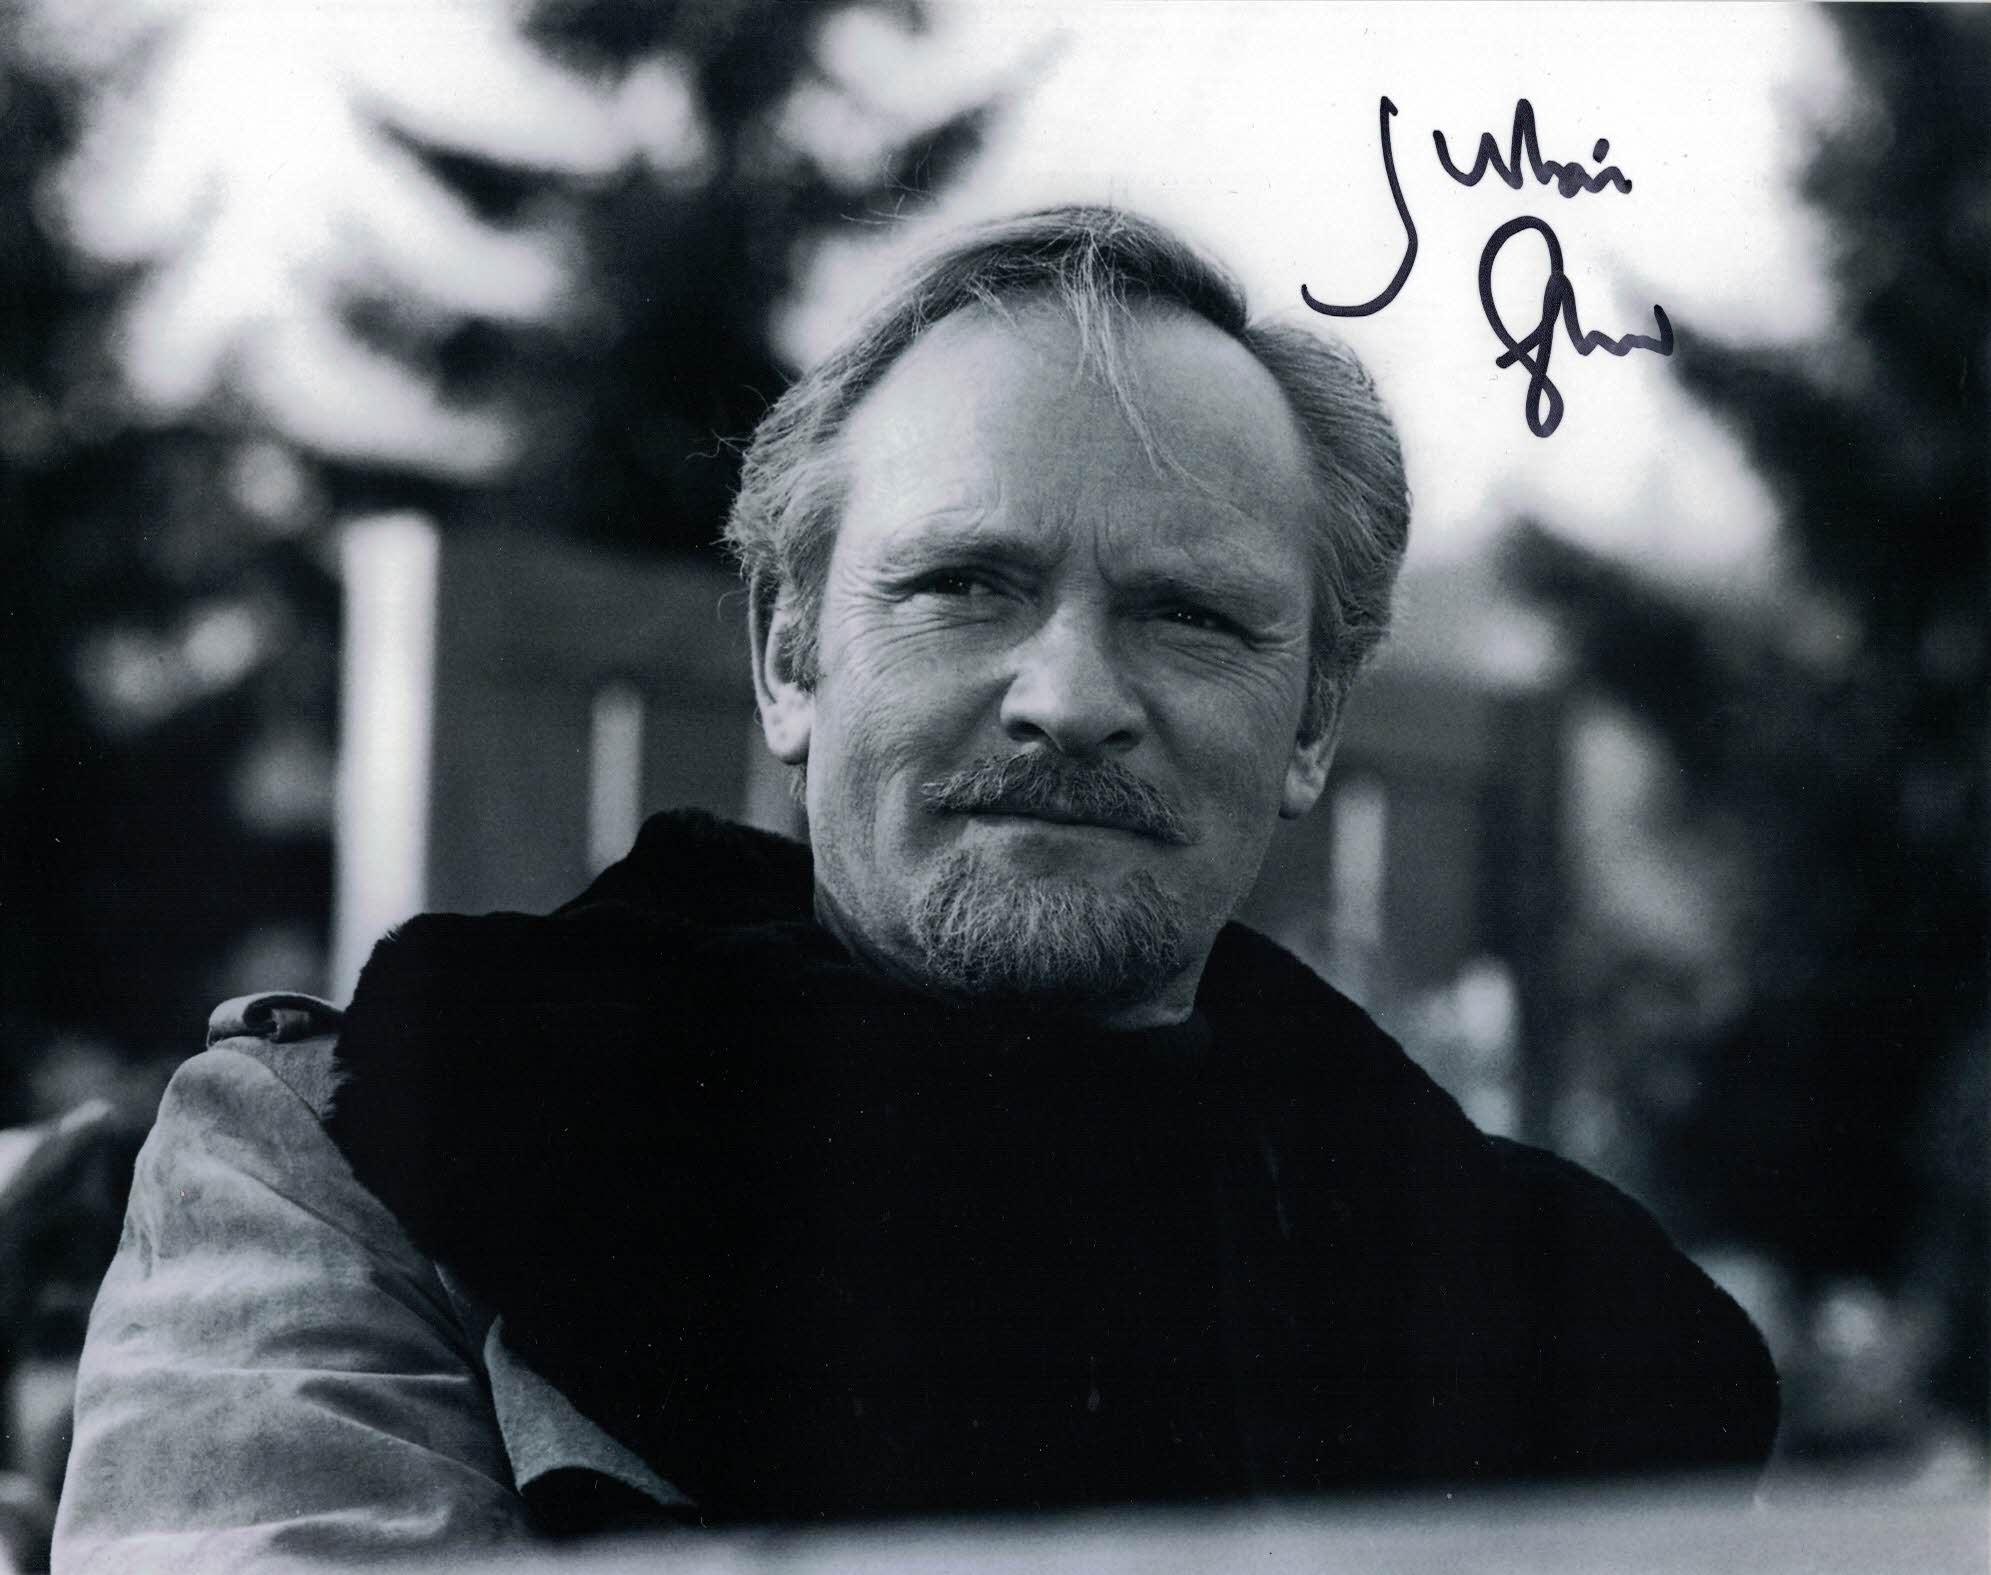 JULIAN GLOVER - Kristatos - For Your Eyes Only hand signed 10 x 8 photo